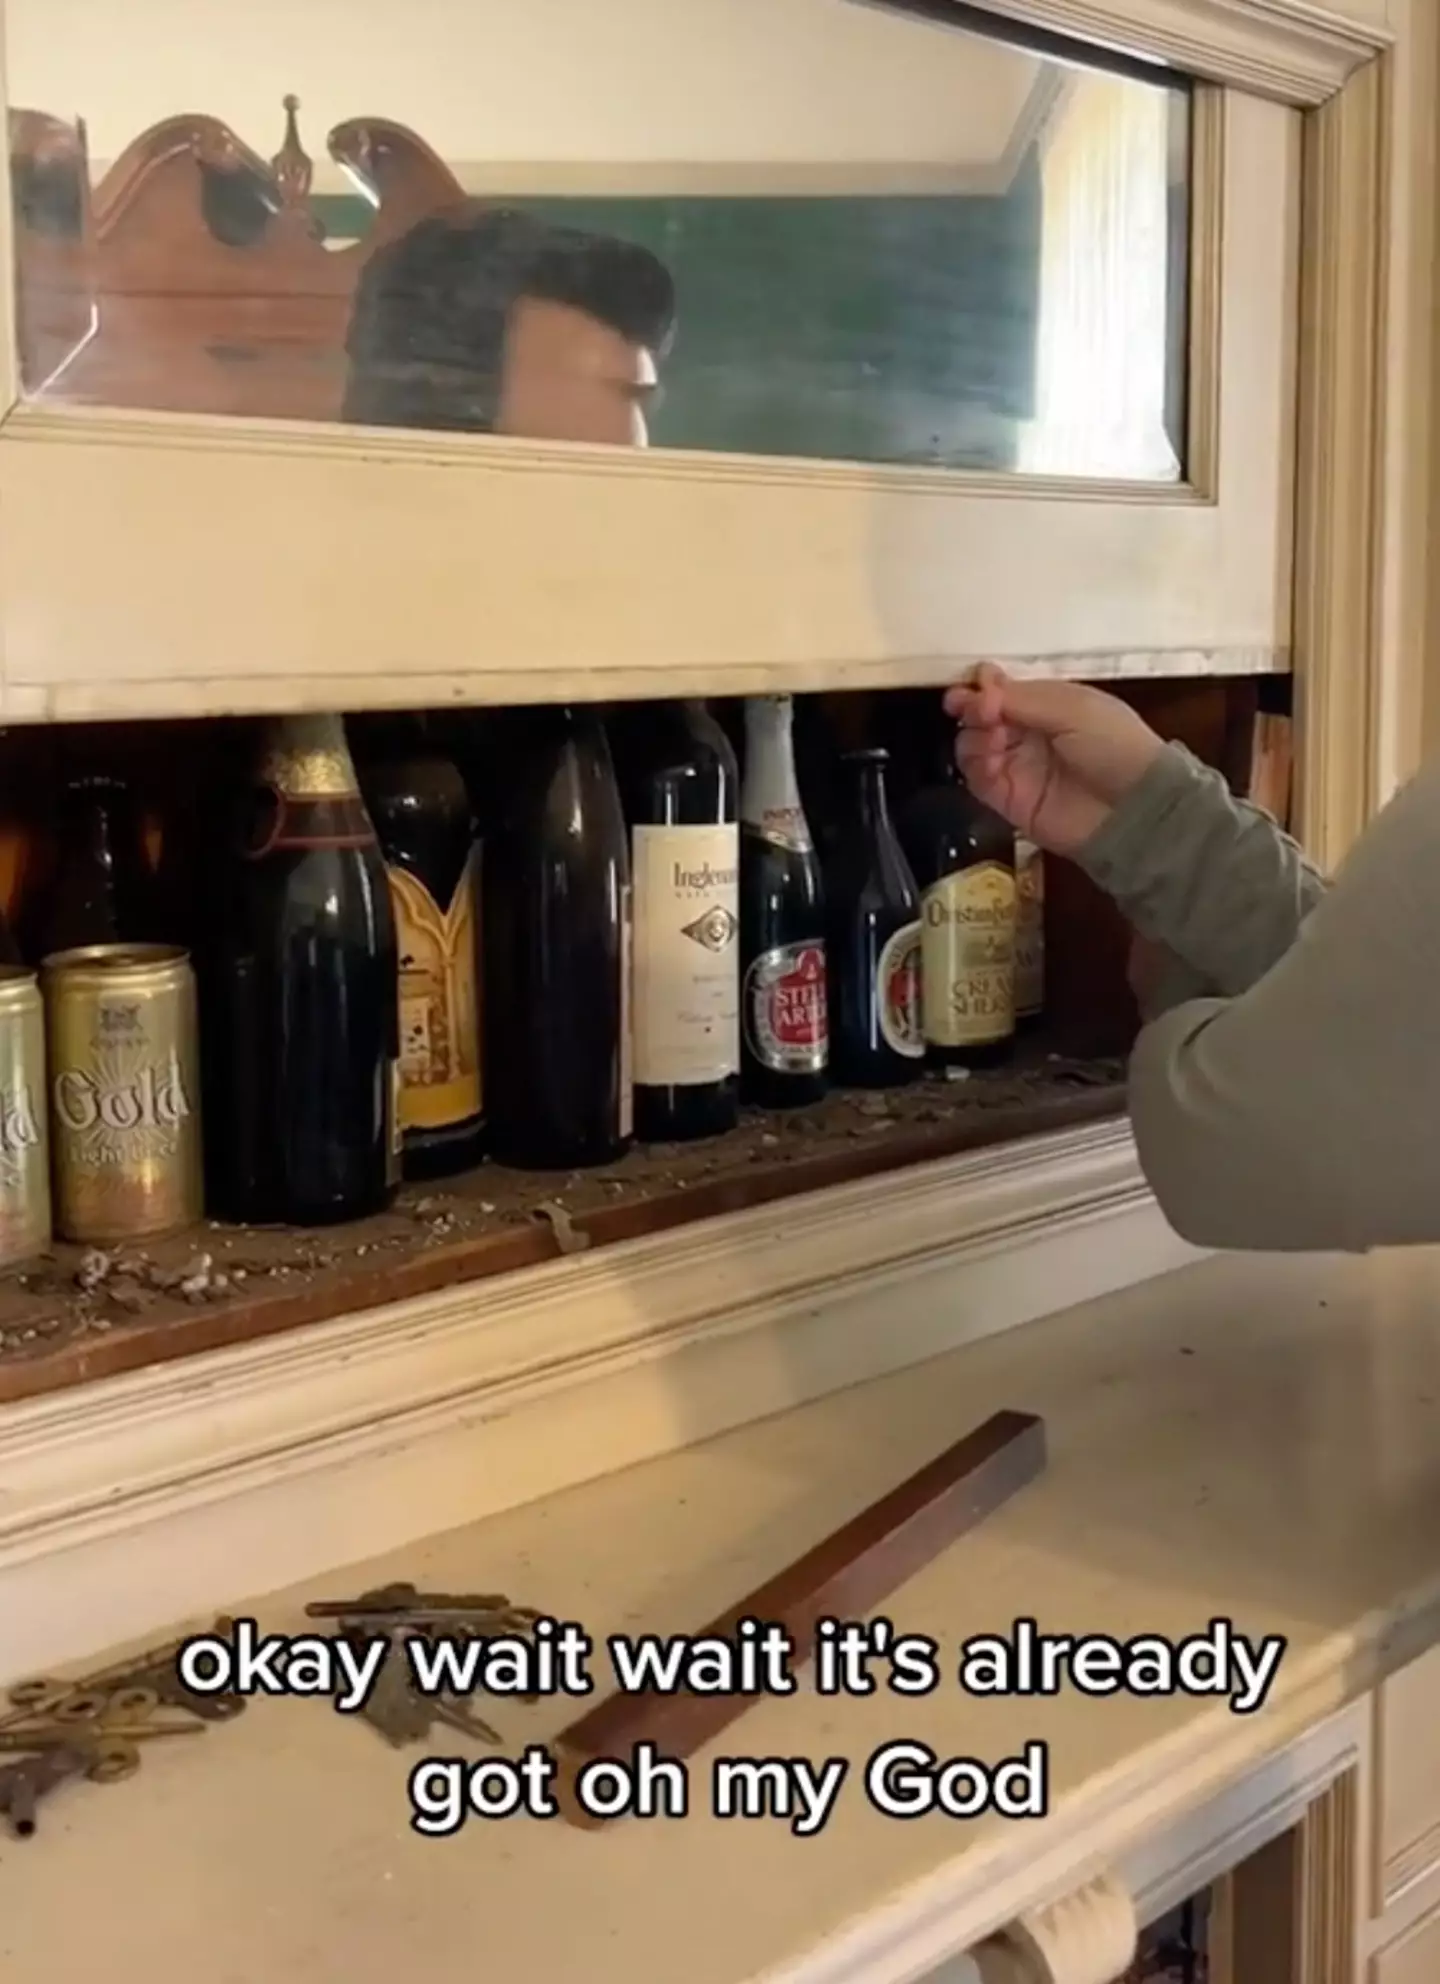 They found a hidden cabinet stuffed with vintage booze.